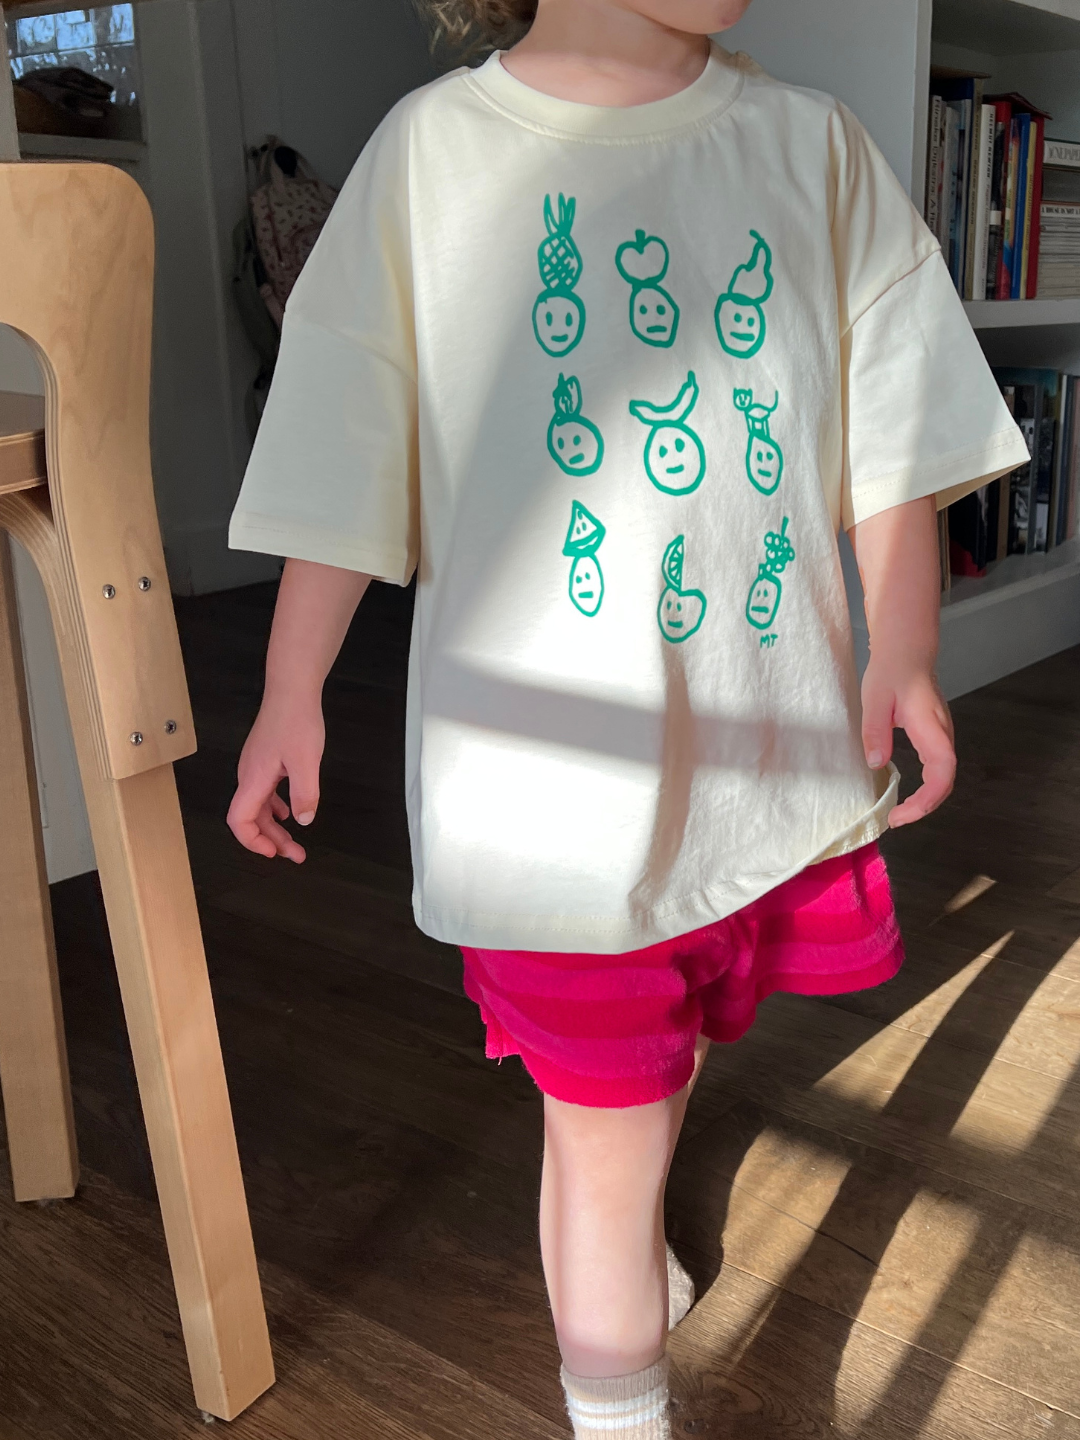 A child is wearing a cream Fruit Face tee with pink shorts indoors.